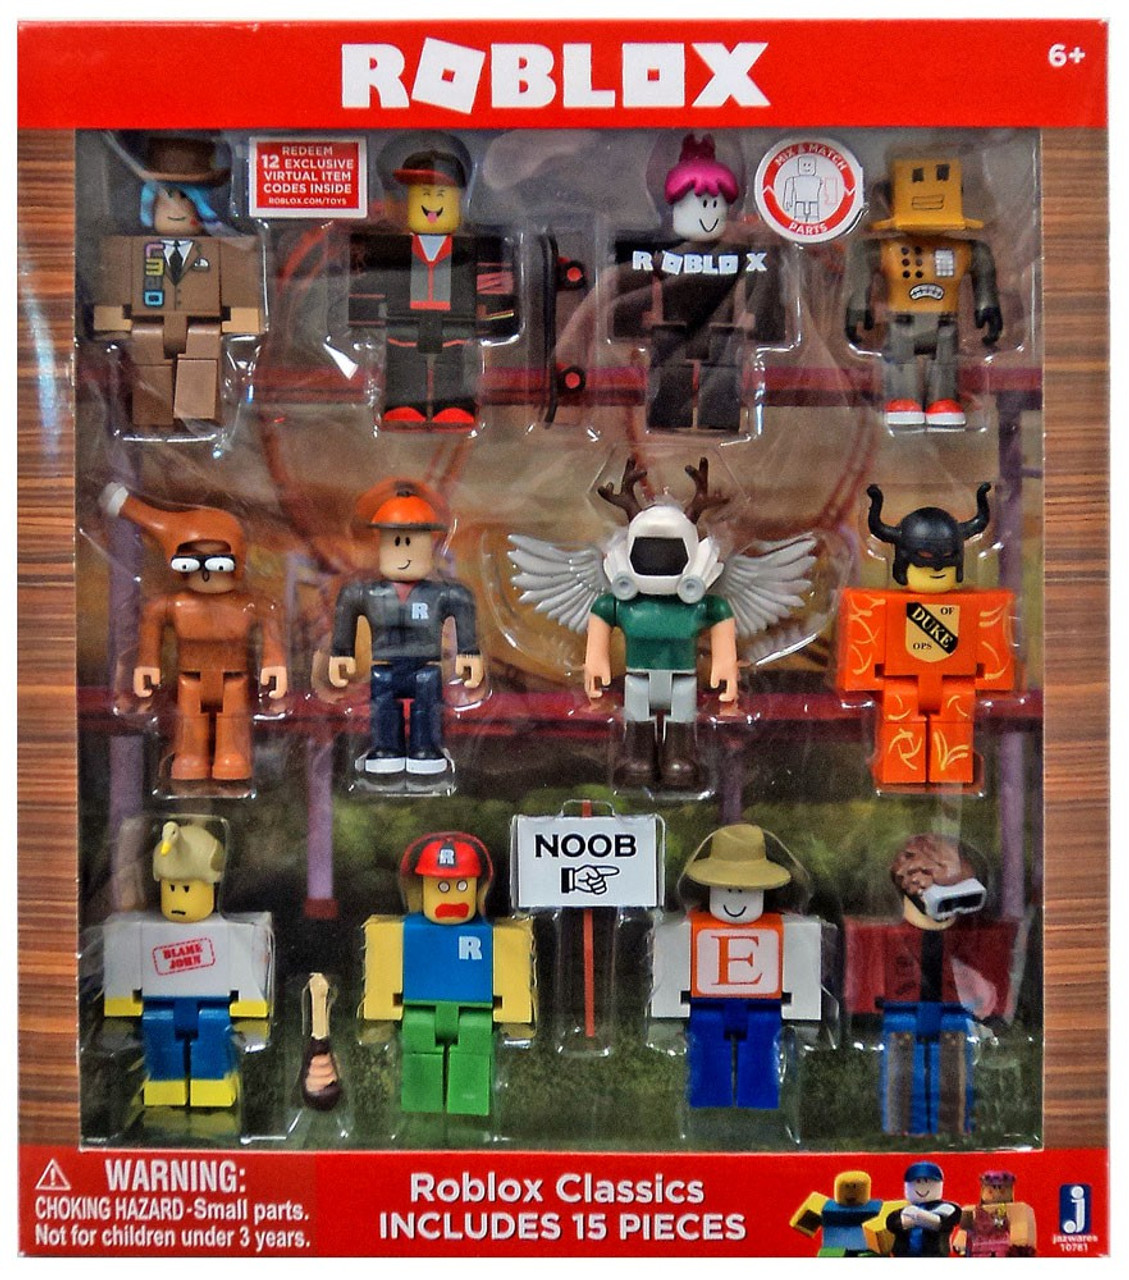 Roblox Series 1 Roblox Classics Exclusive Action Figu!   re 12 Pack - roblox series 1 roblox classics exclusive action figure 12 pack includes 12 online item codes jazwares toywiz